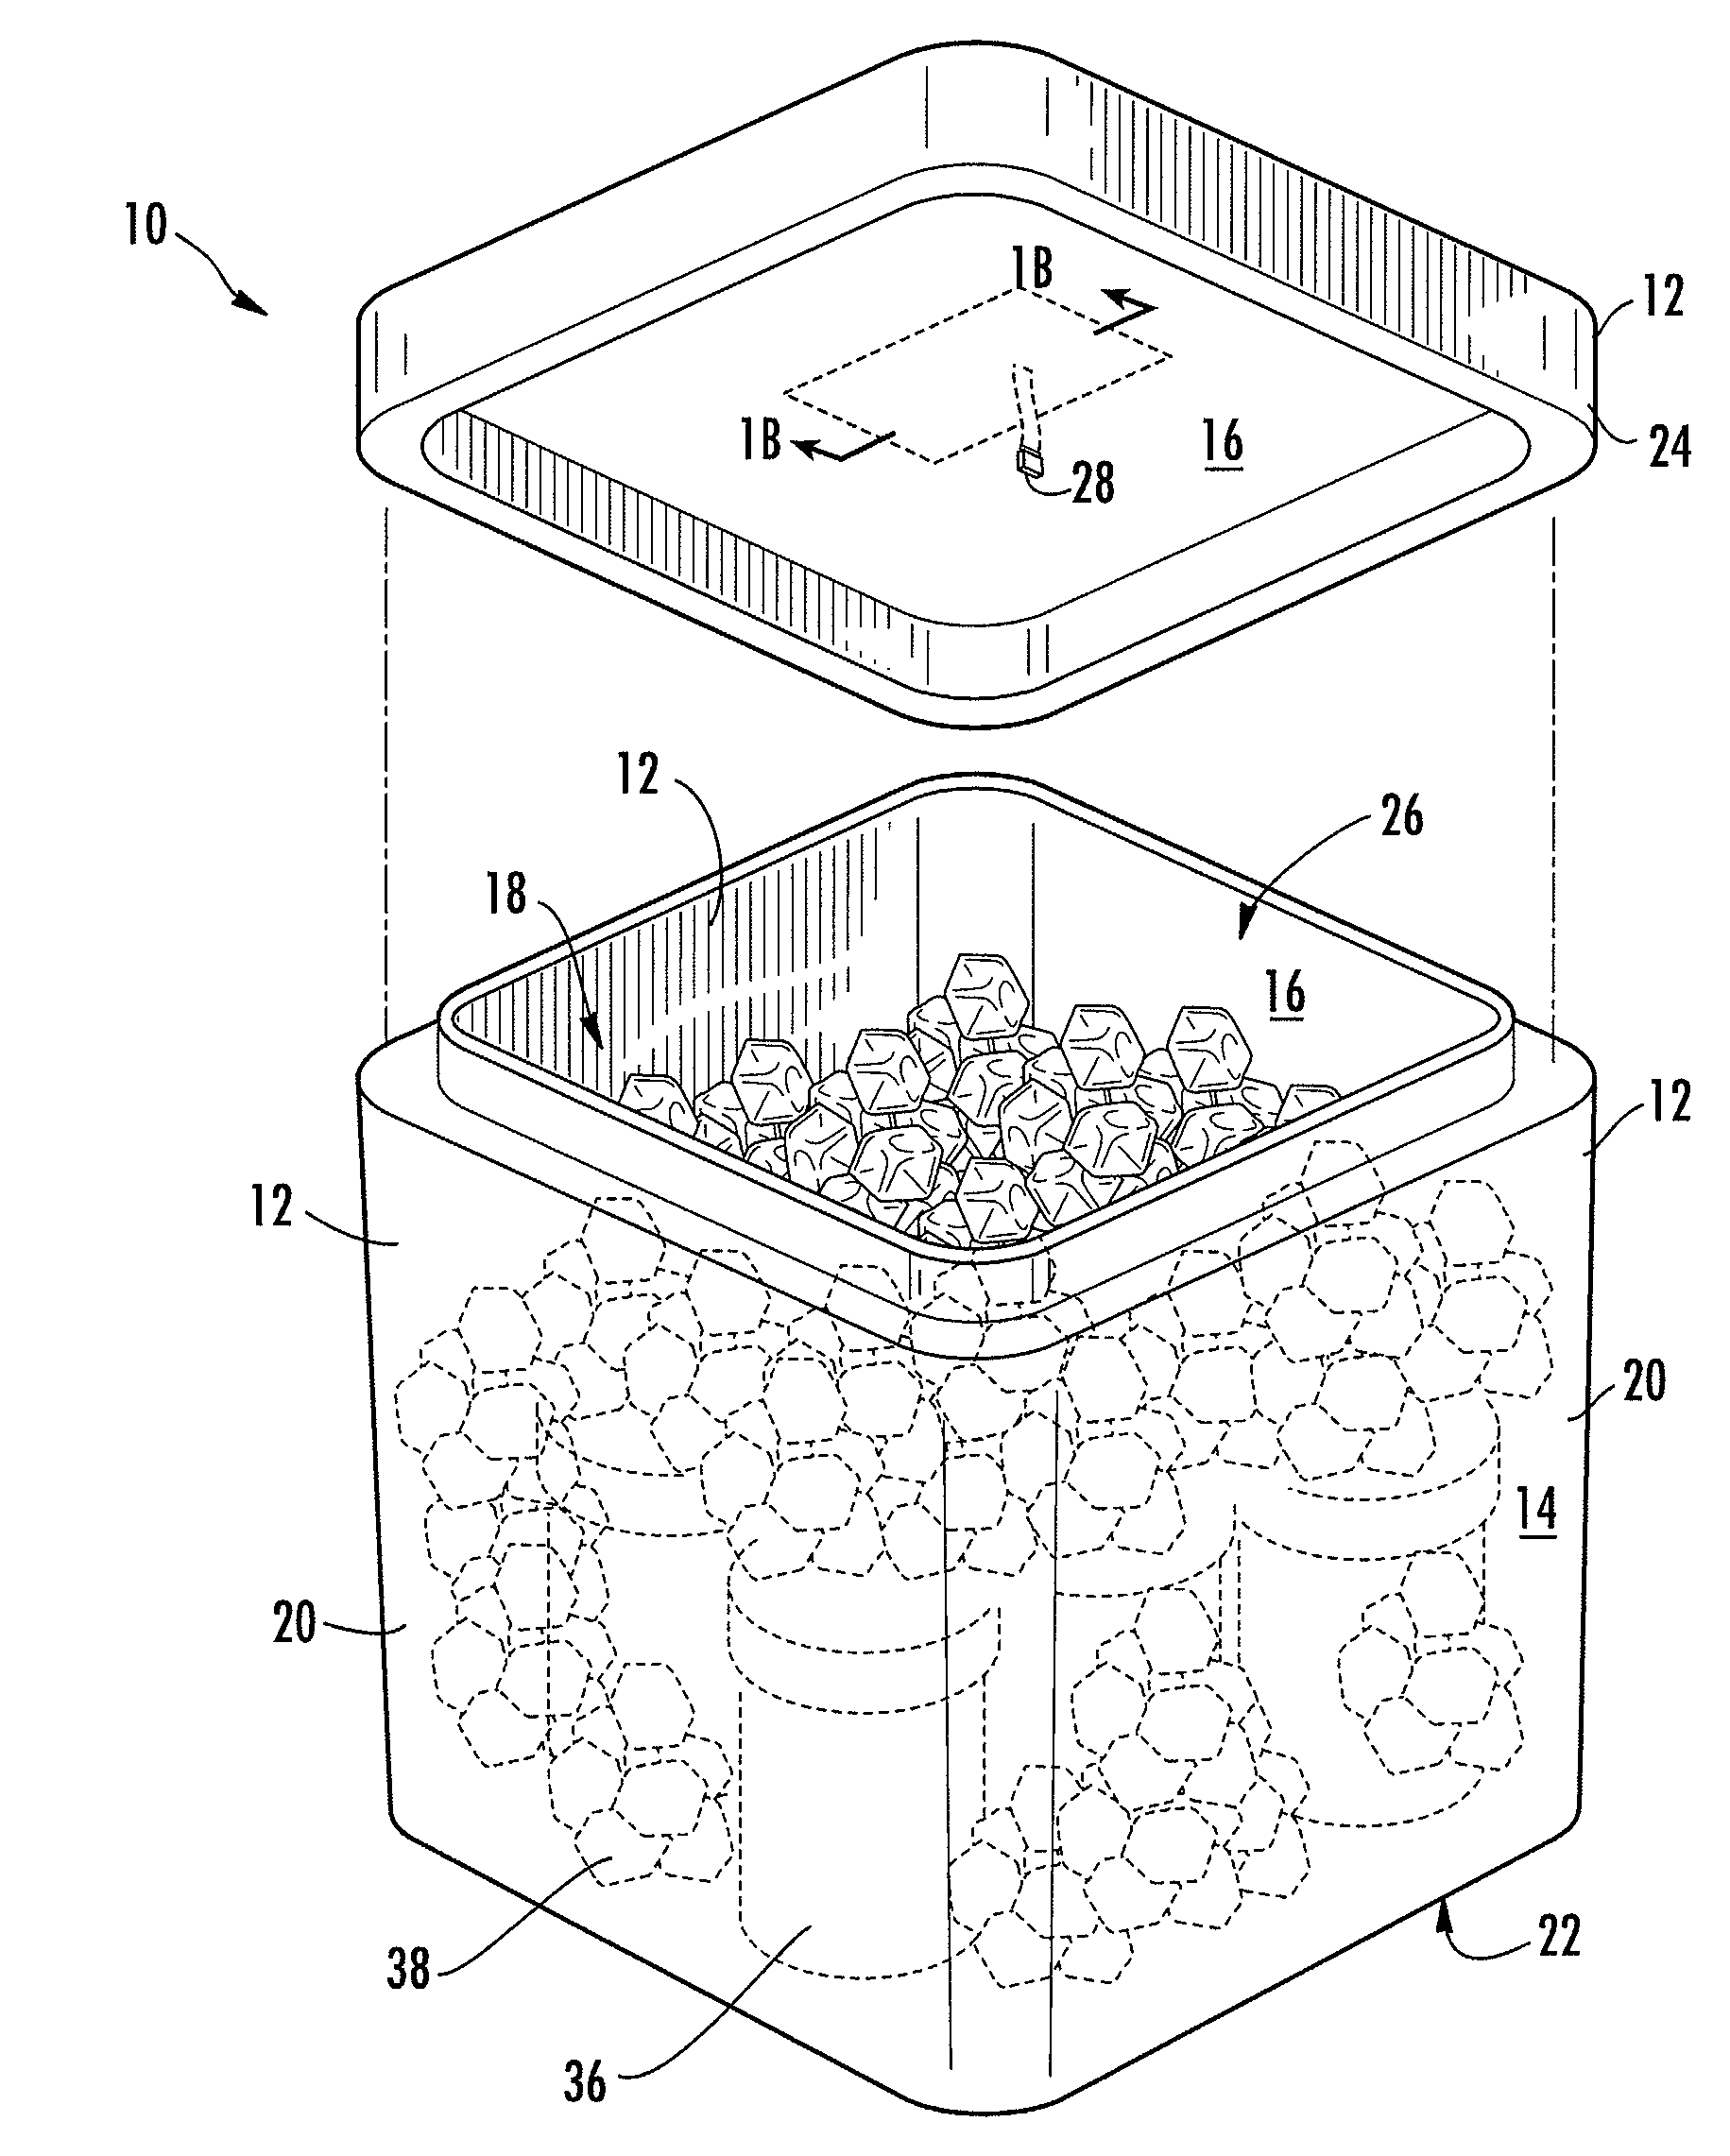 Insulated Container Having a Temperature Monitoring Device